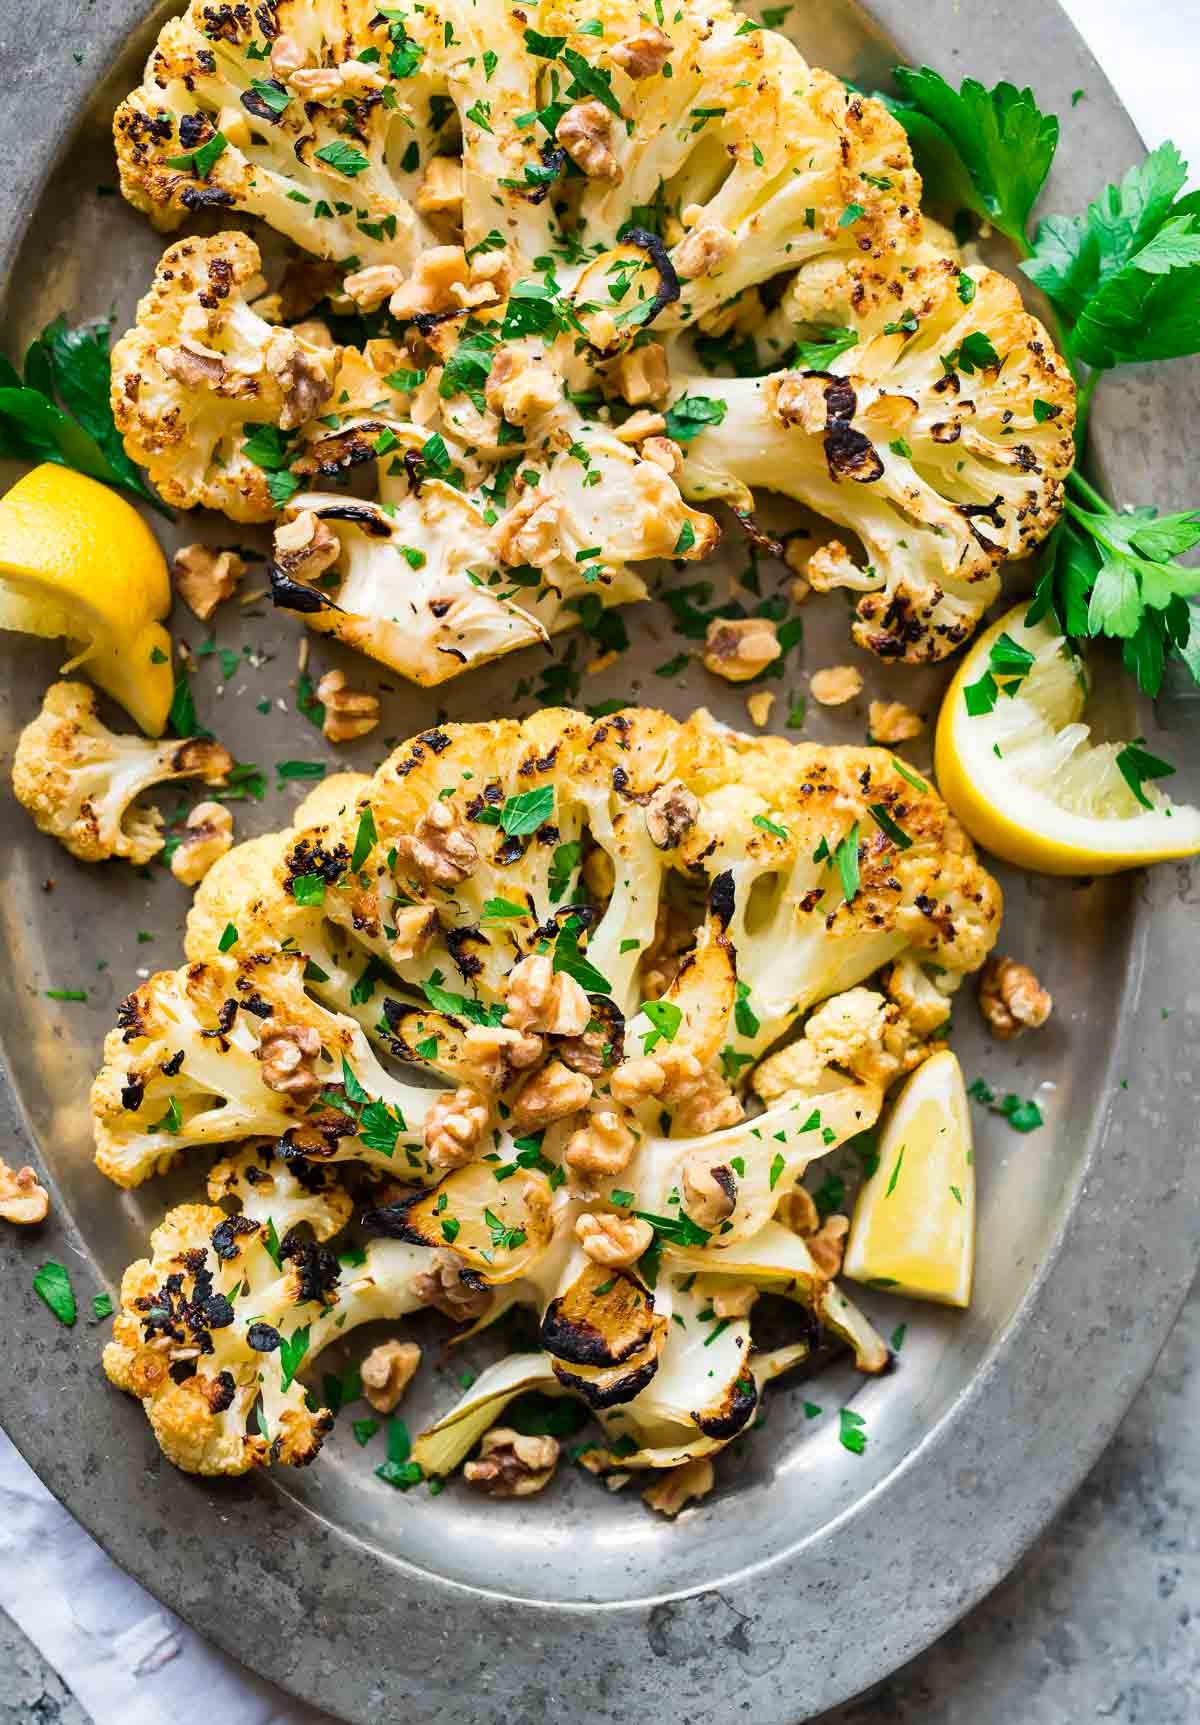 Grilled Cauliflower Steaks
 How to Make Grilled Cauliflower Steaks